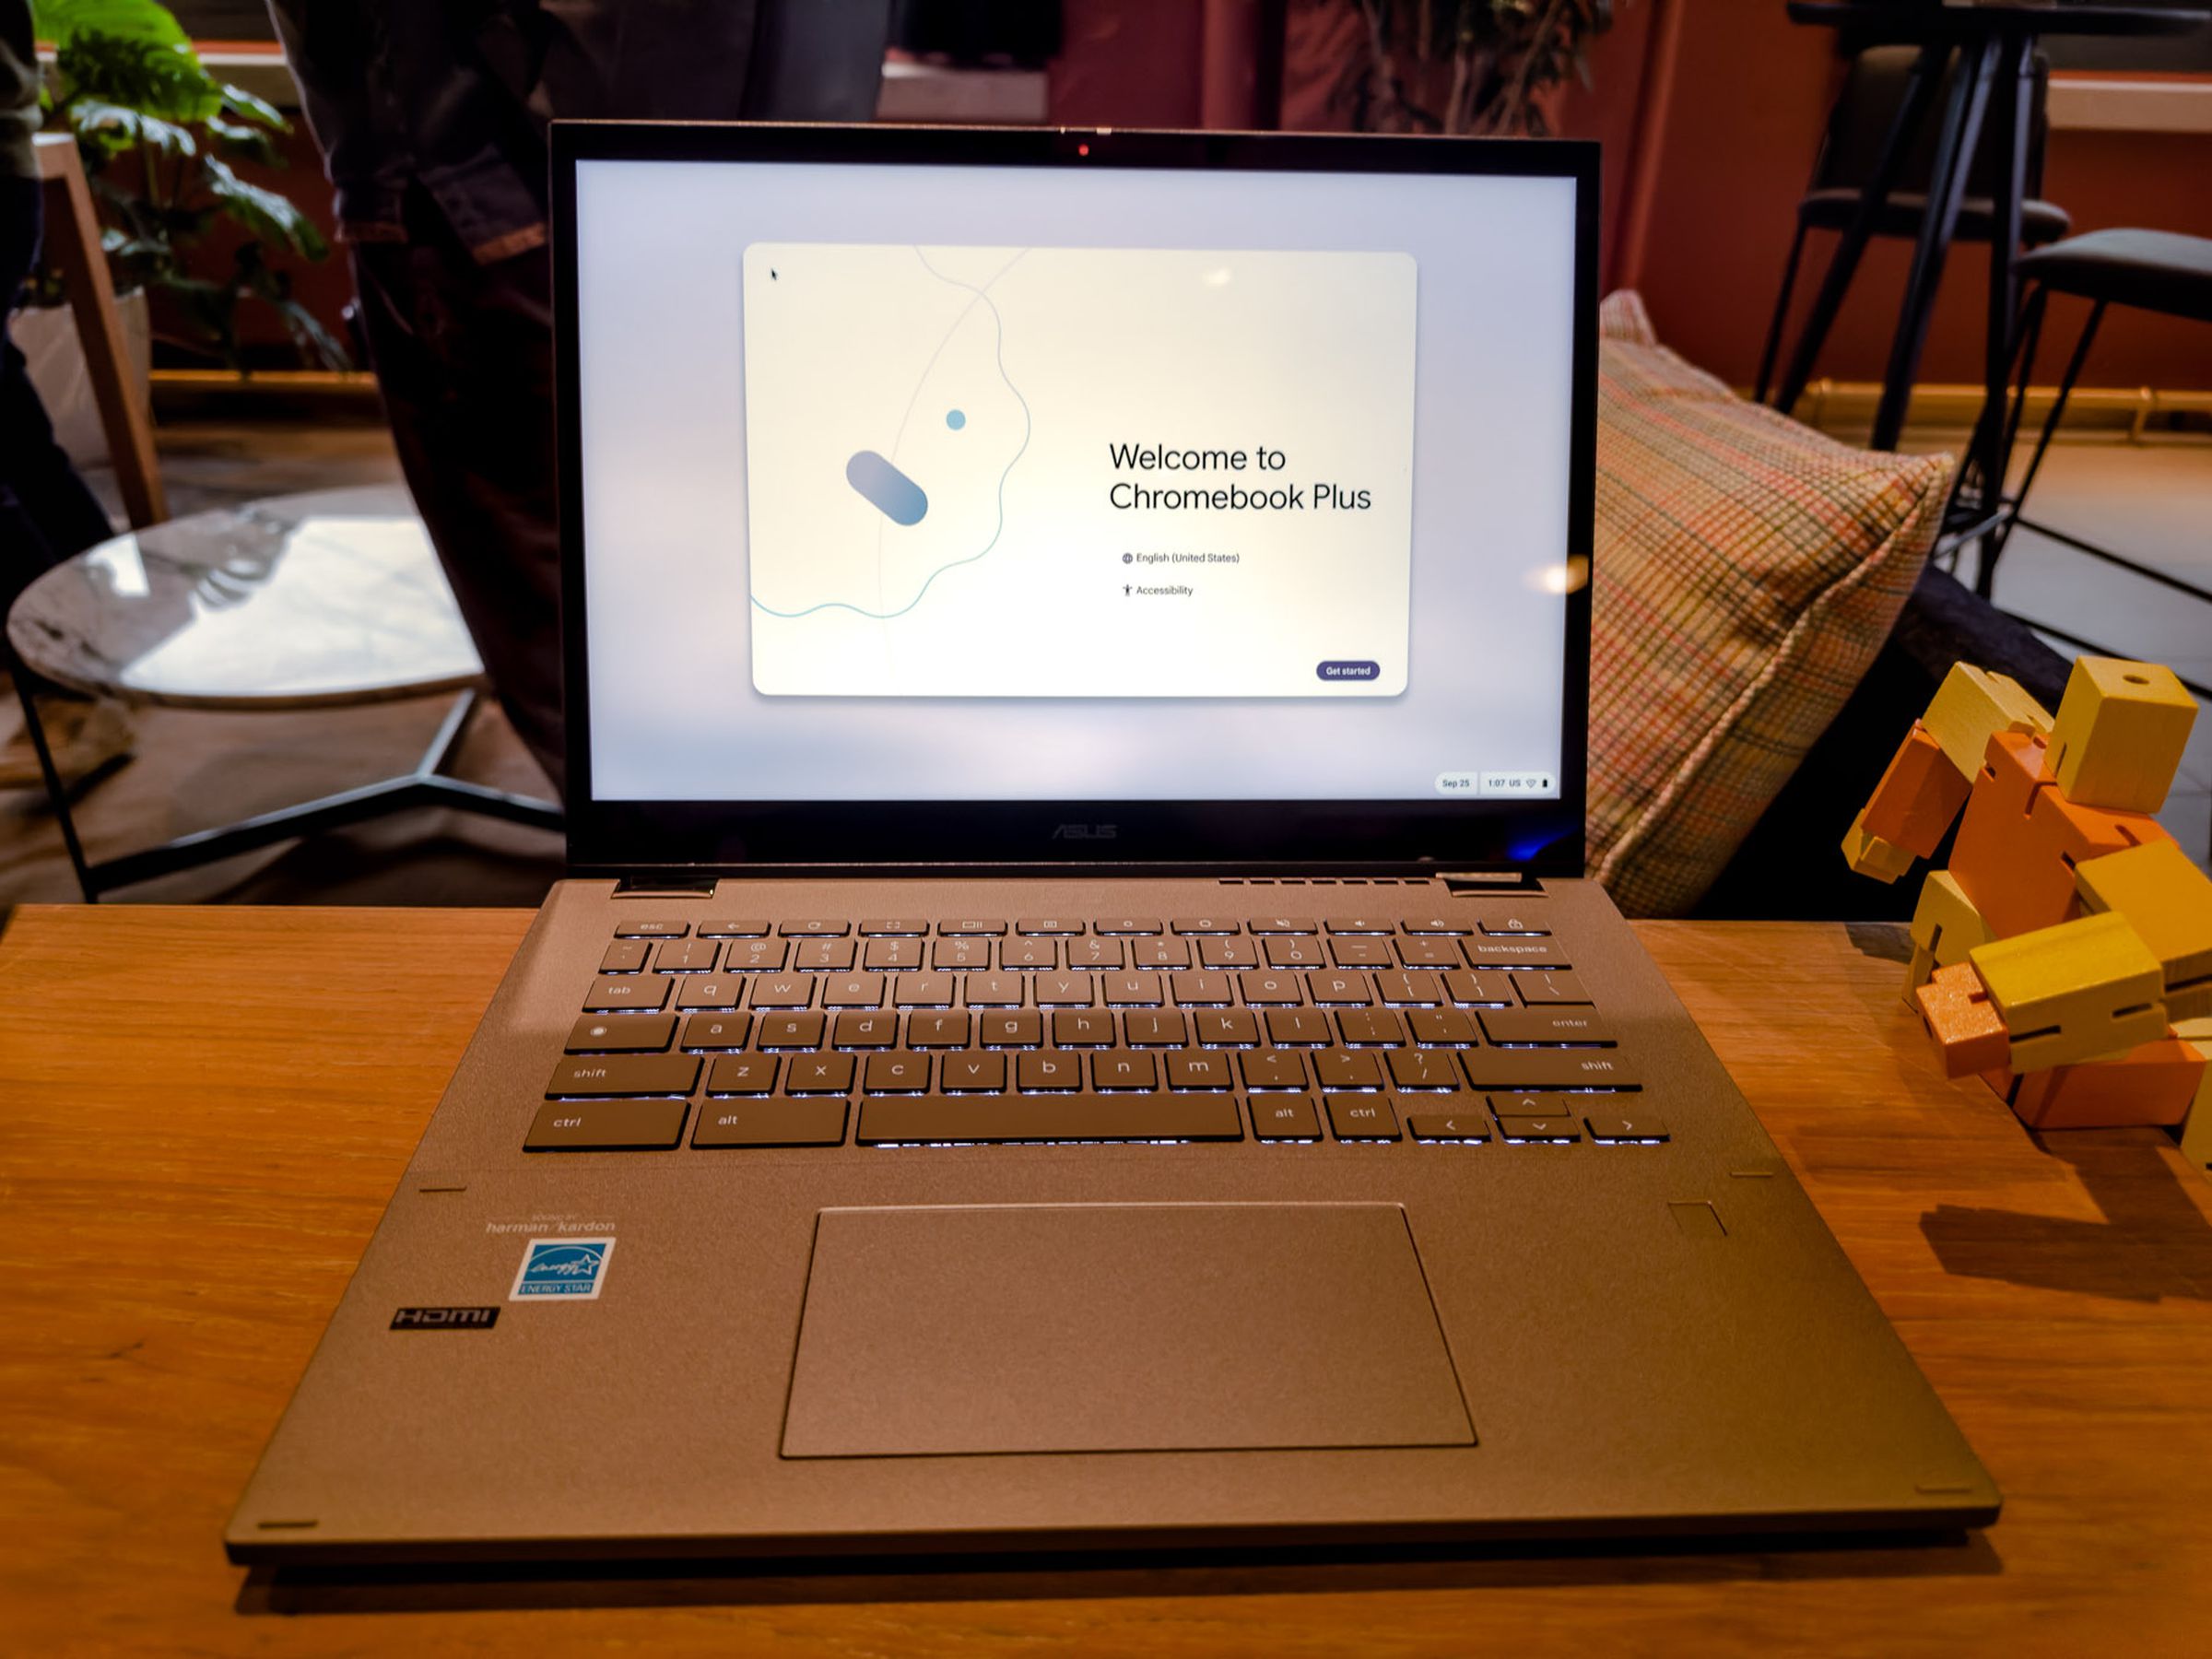 The Asus Chromebook Plus CM34 Flip displaying the Welcome To Chromebook Plus screen.